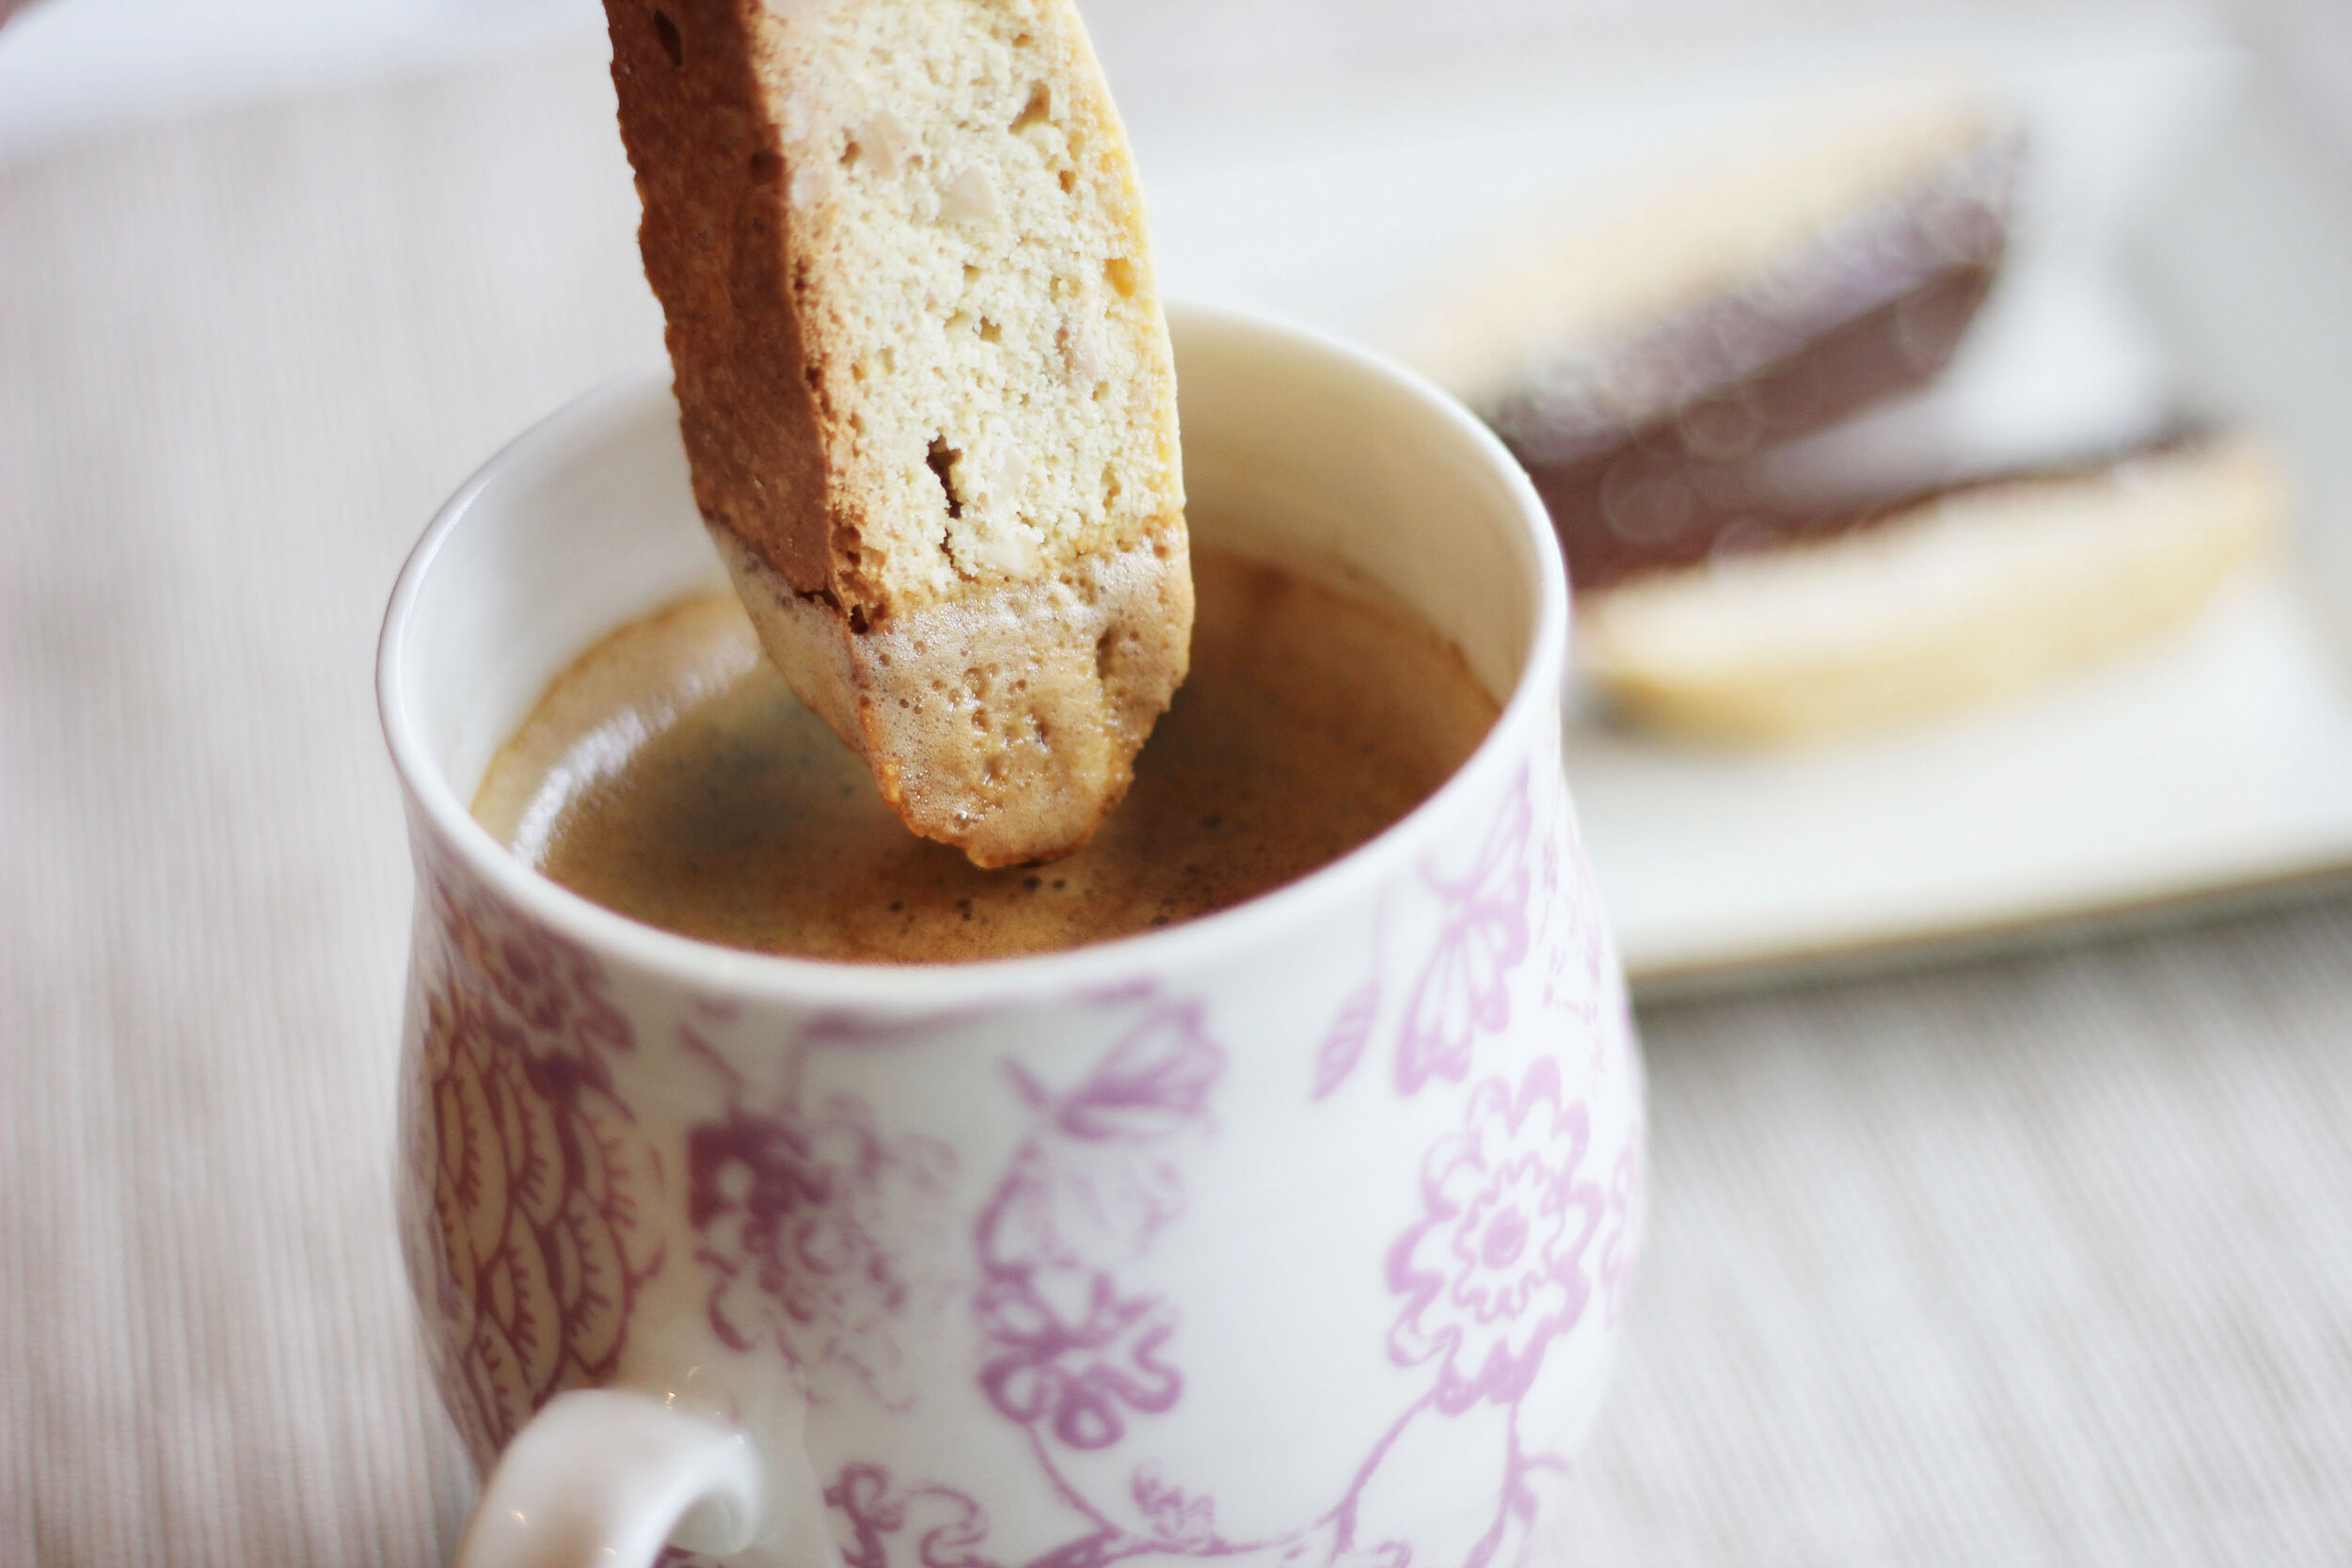 How to Eat Biscotti? 